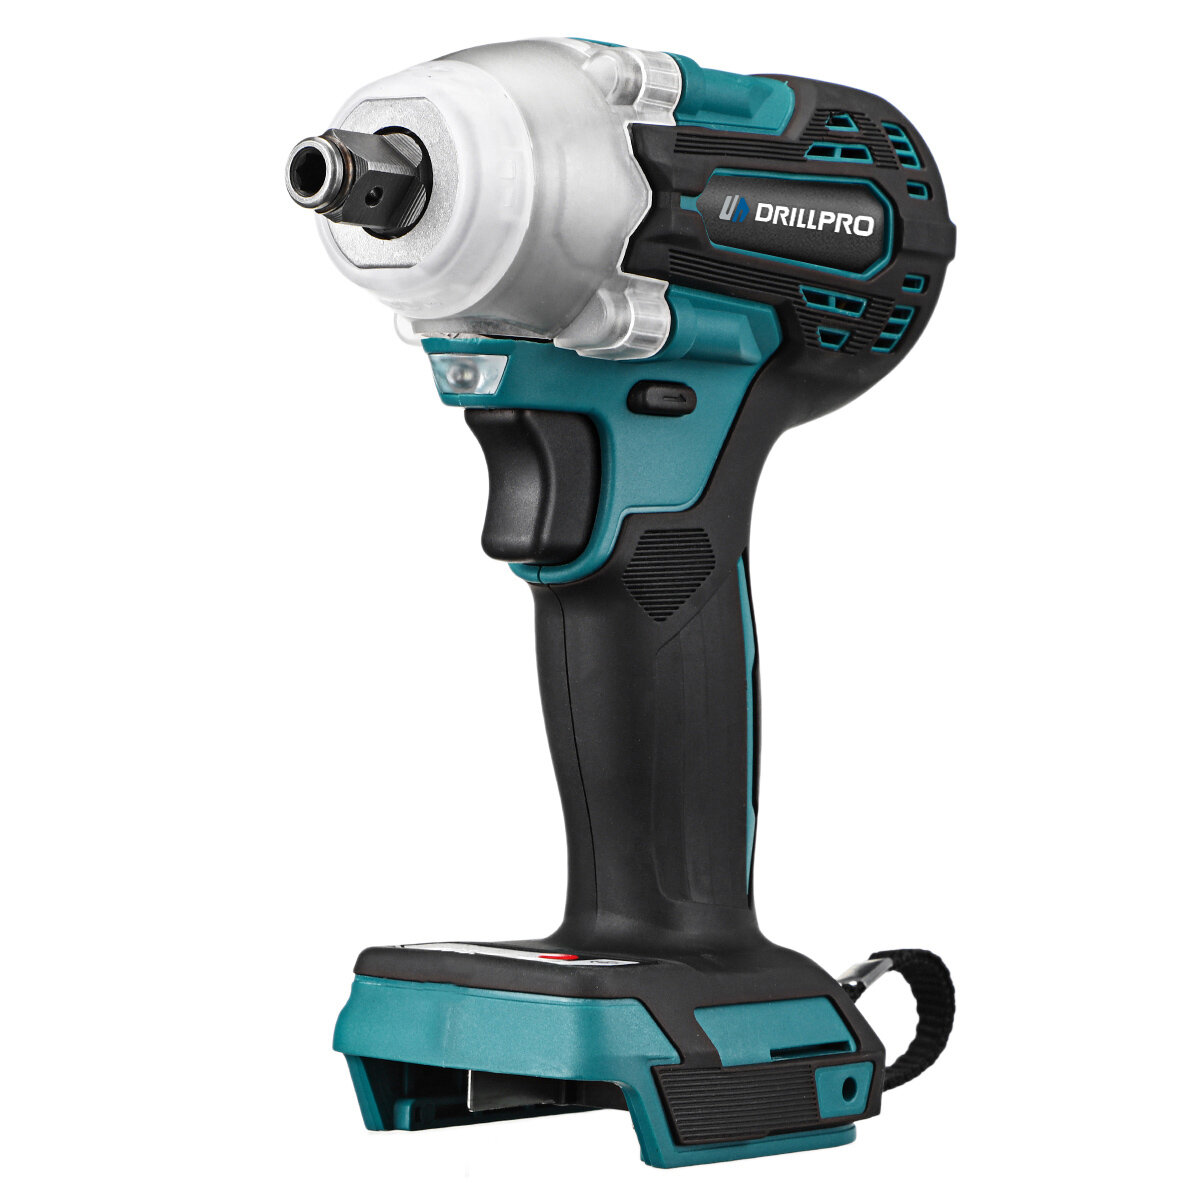 best price,in,520nm,brushless,cordless,electric,1/2inch,wrench,for,makita,18v,discount